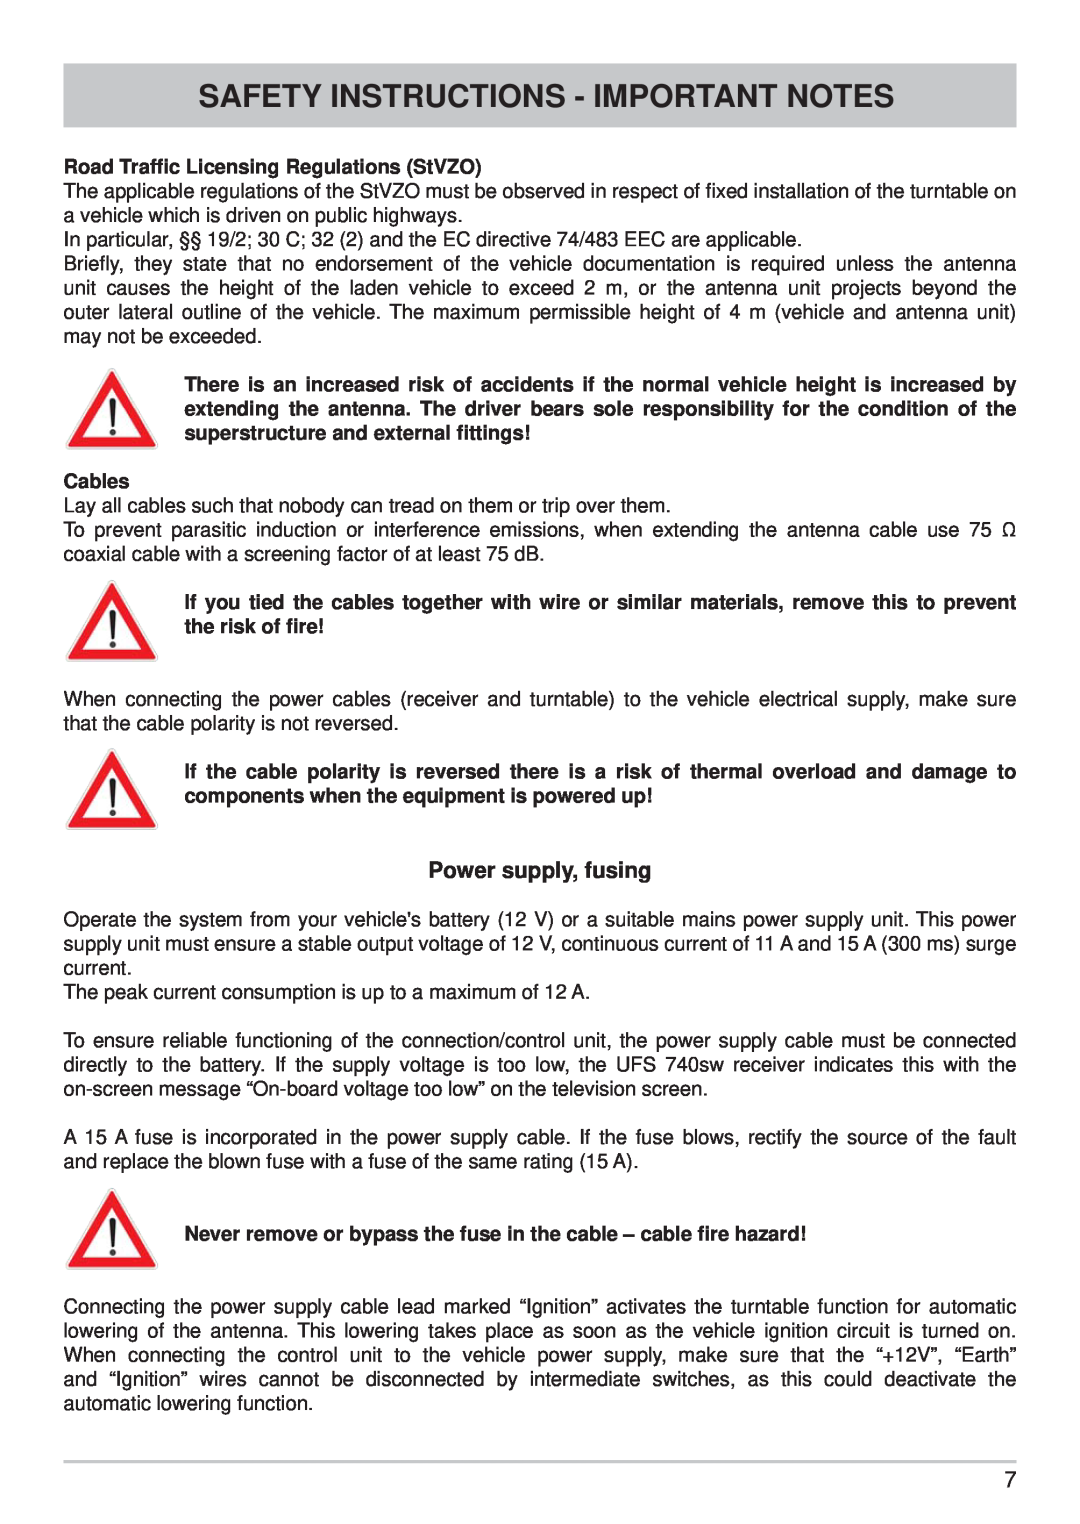 Kathrein CAP 700 manual Safety Instructions - Important Notes, Power supply, fusing 